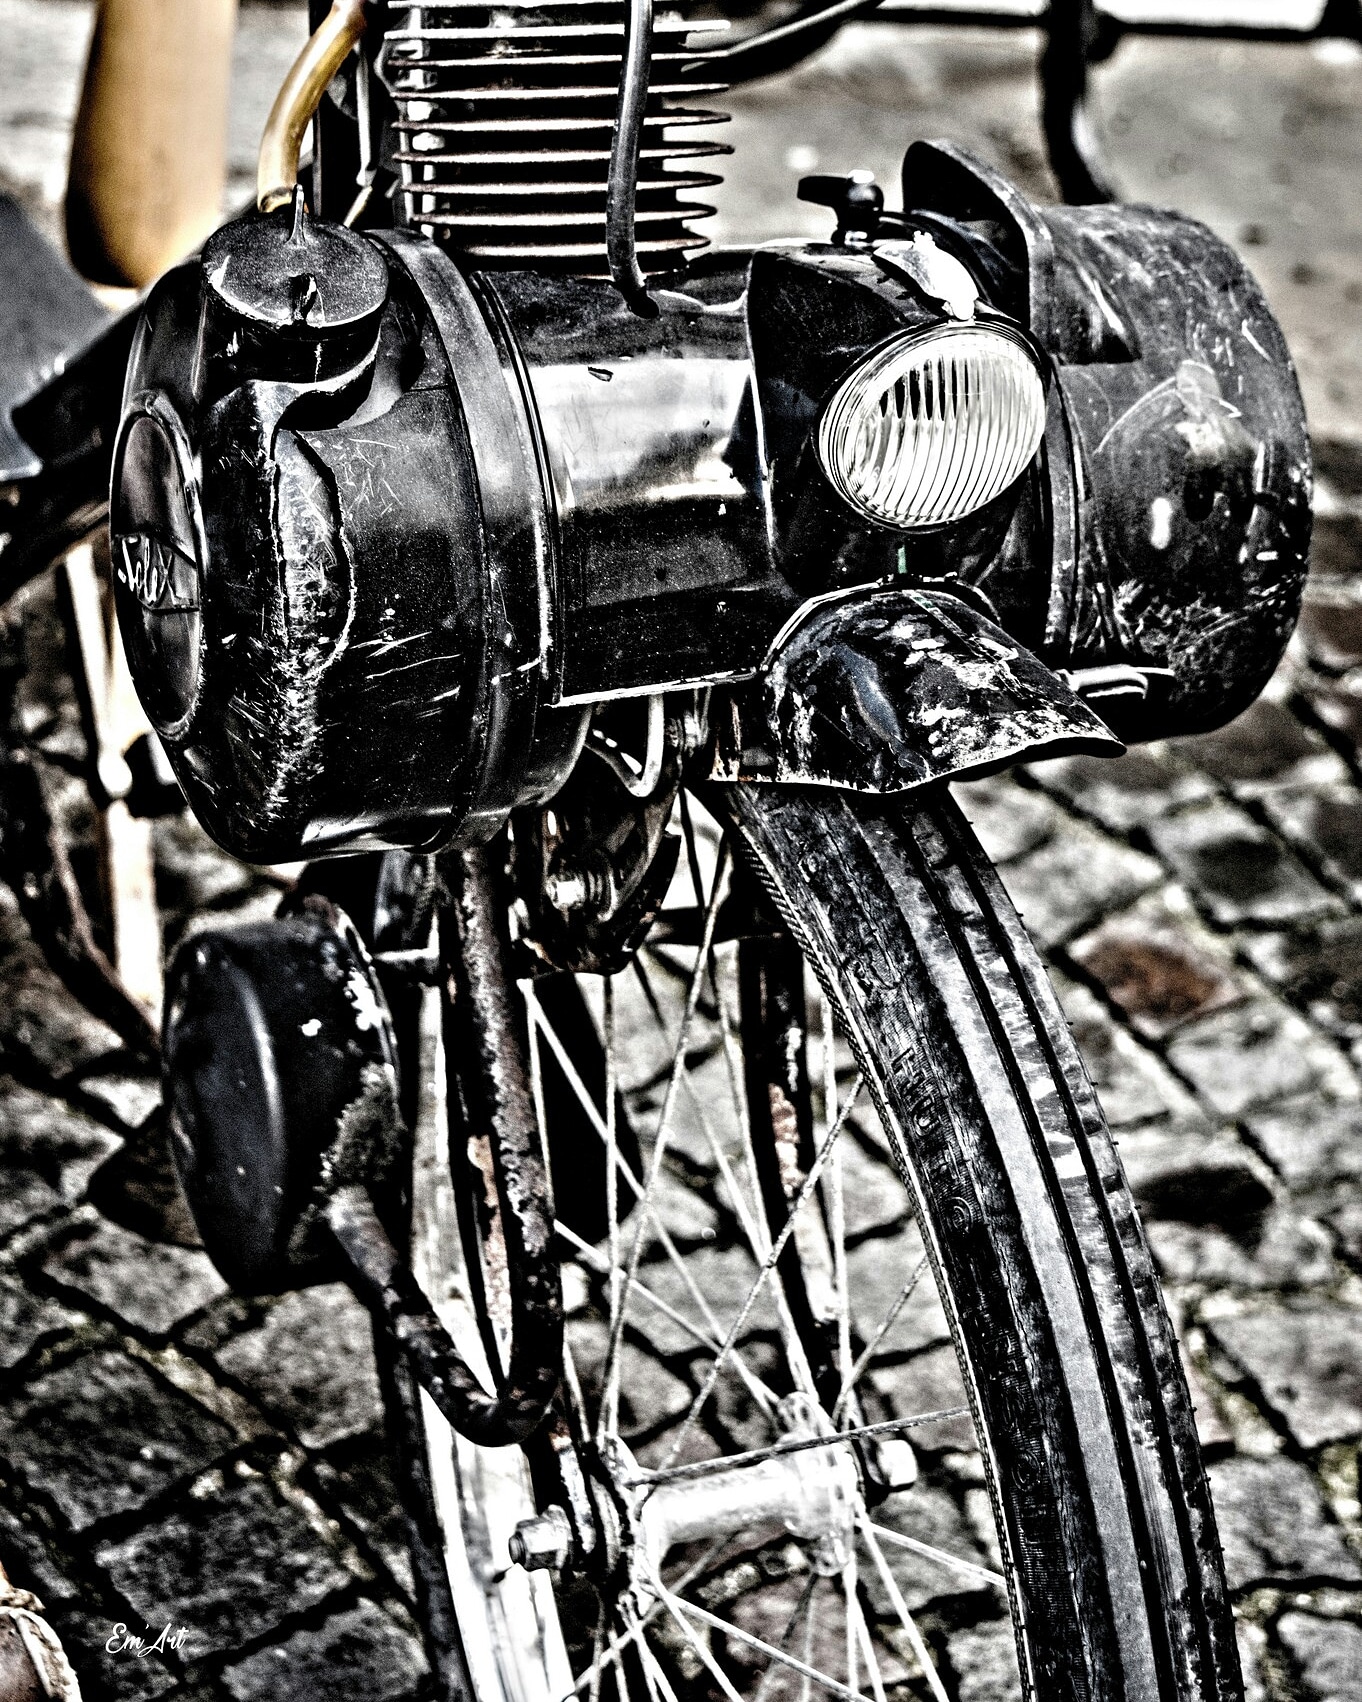 First motorcycle, photography by Em'Art